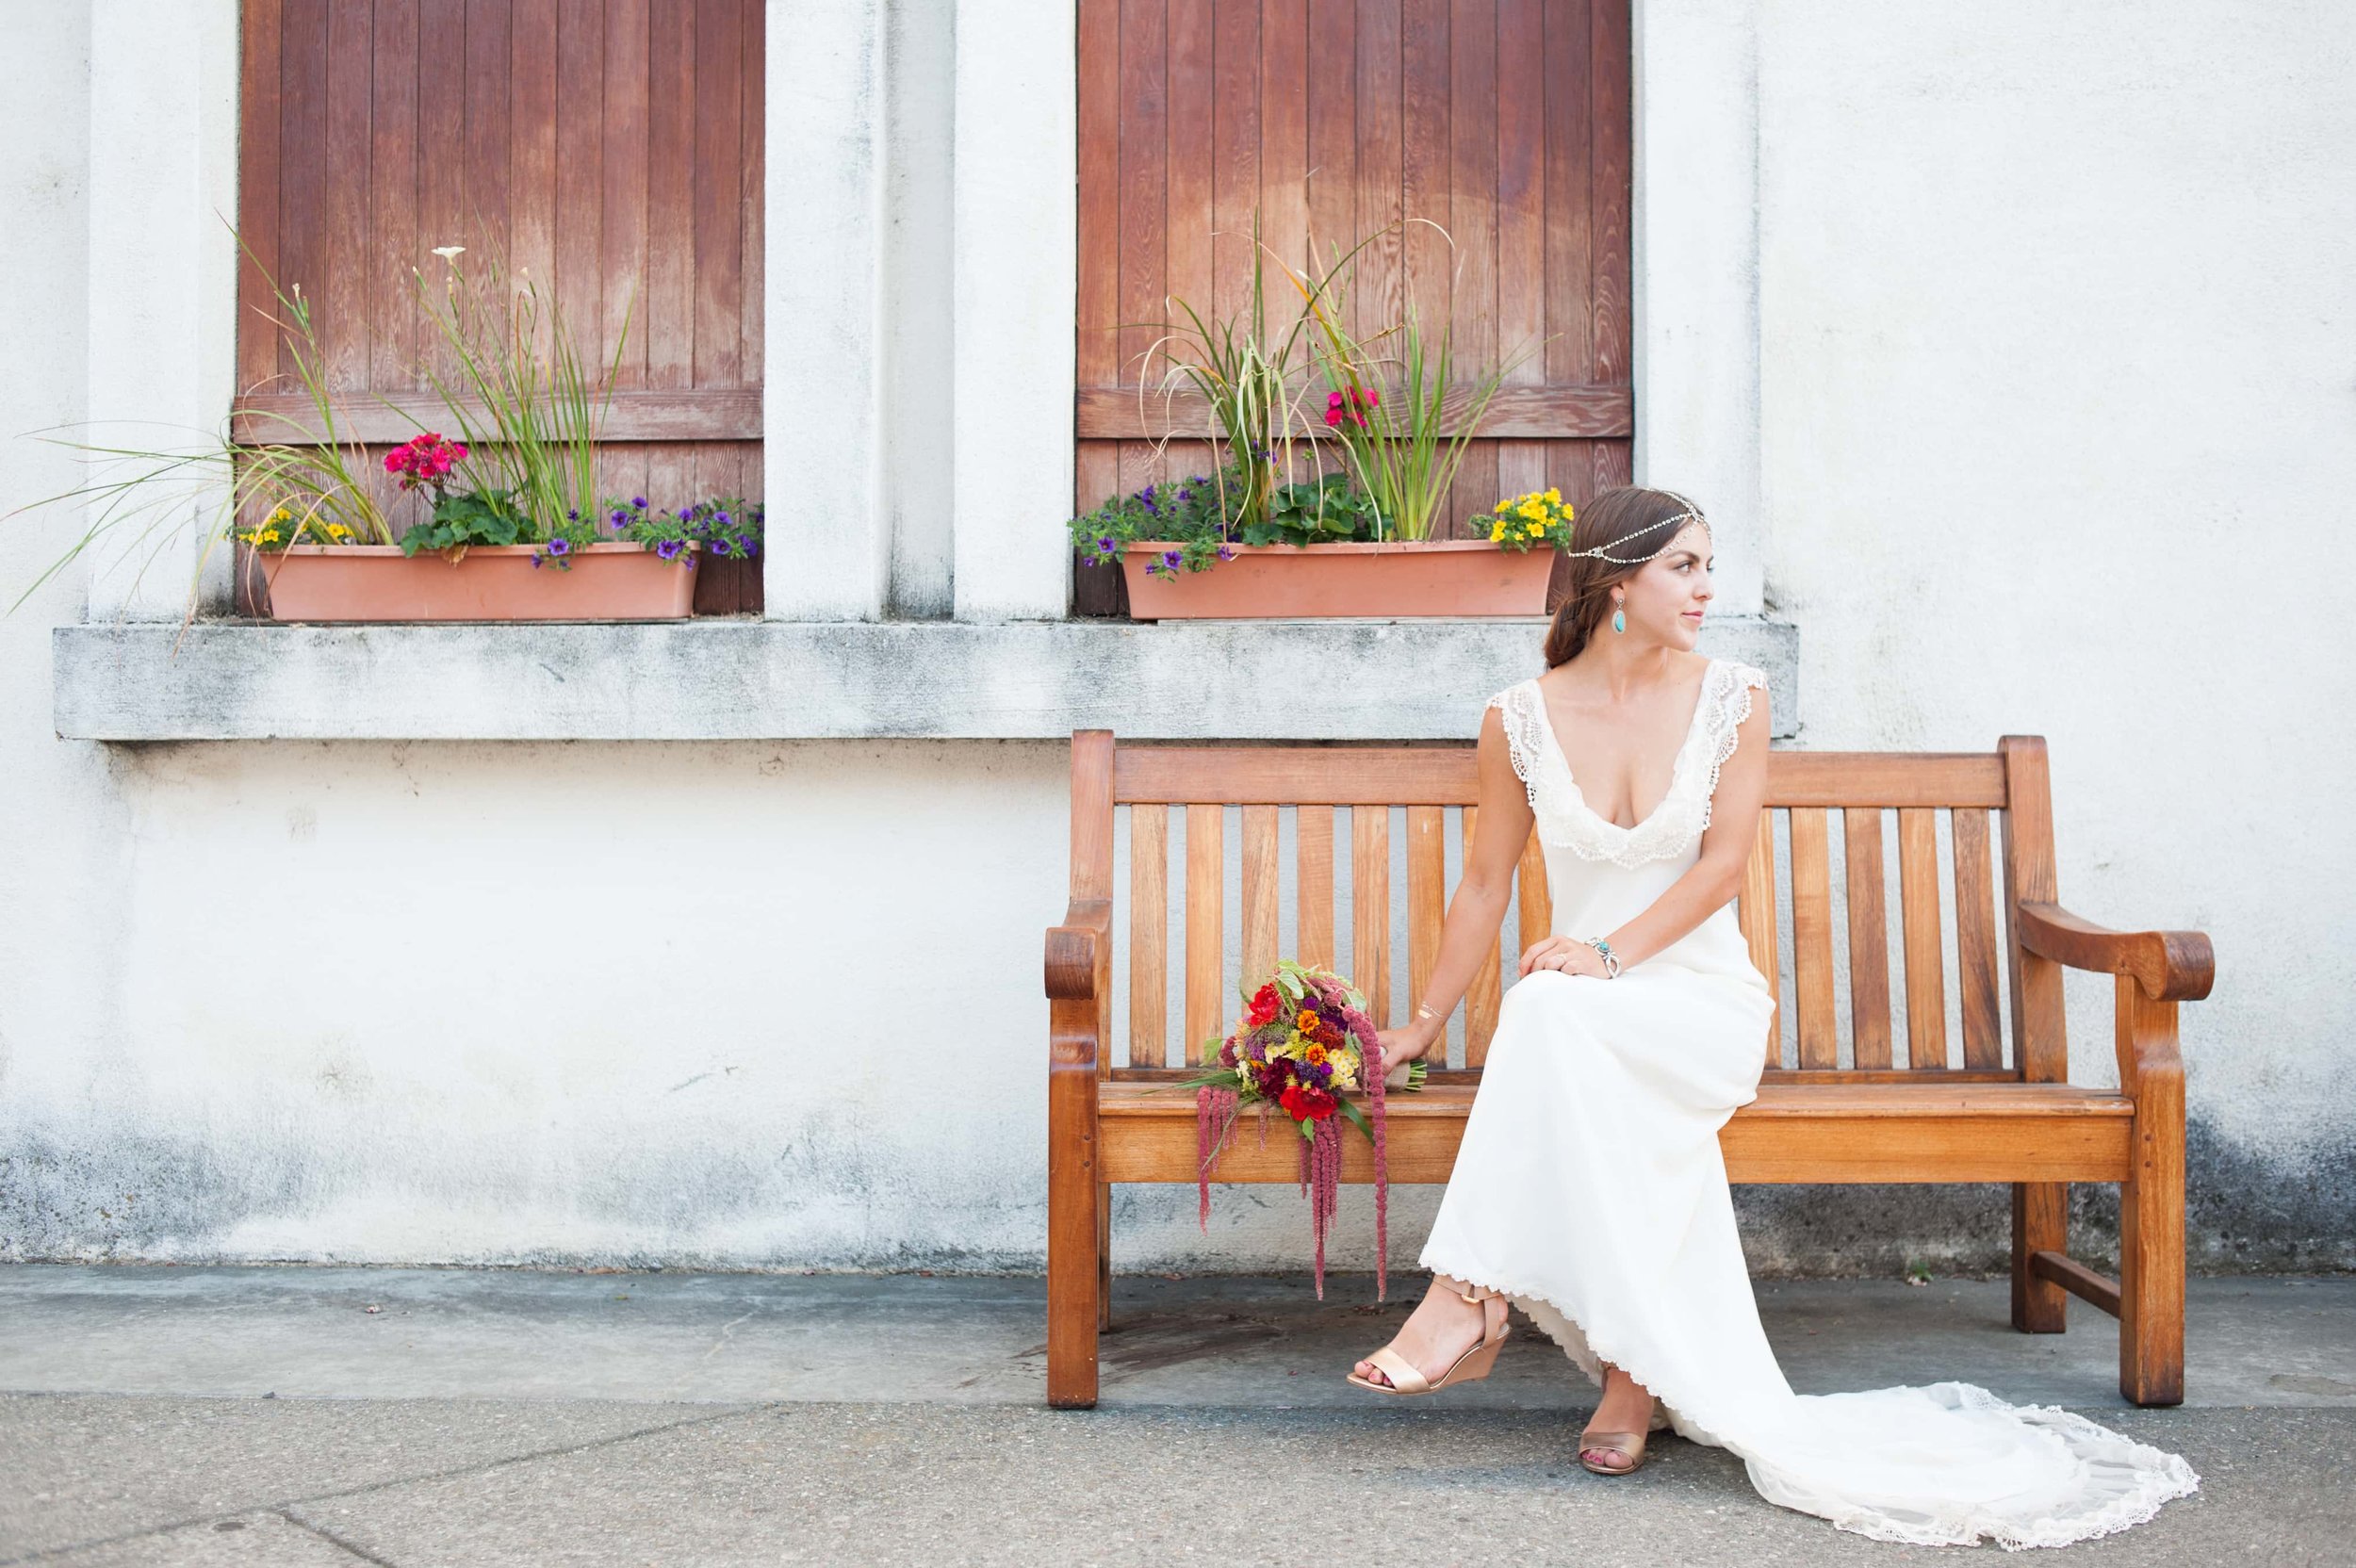 Portrait of bride siting on bench alone